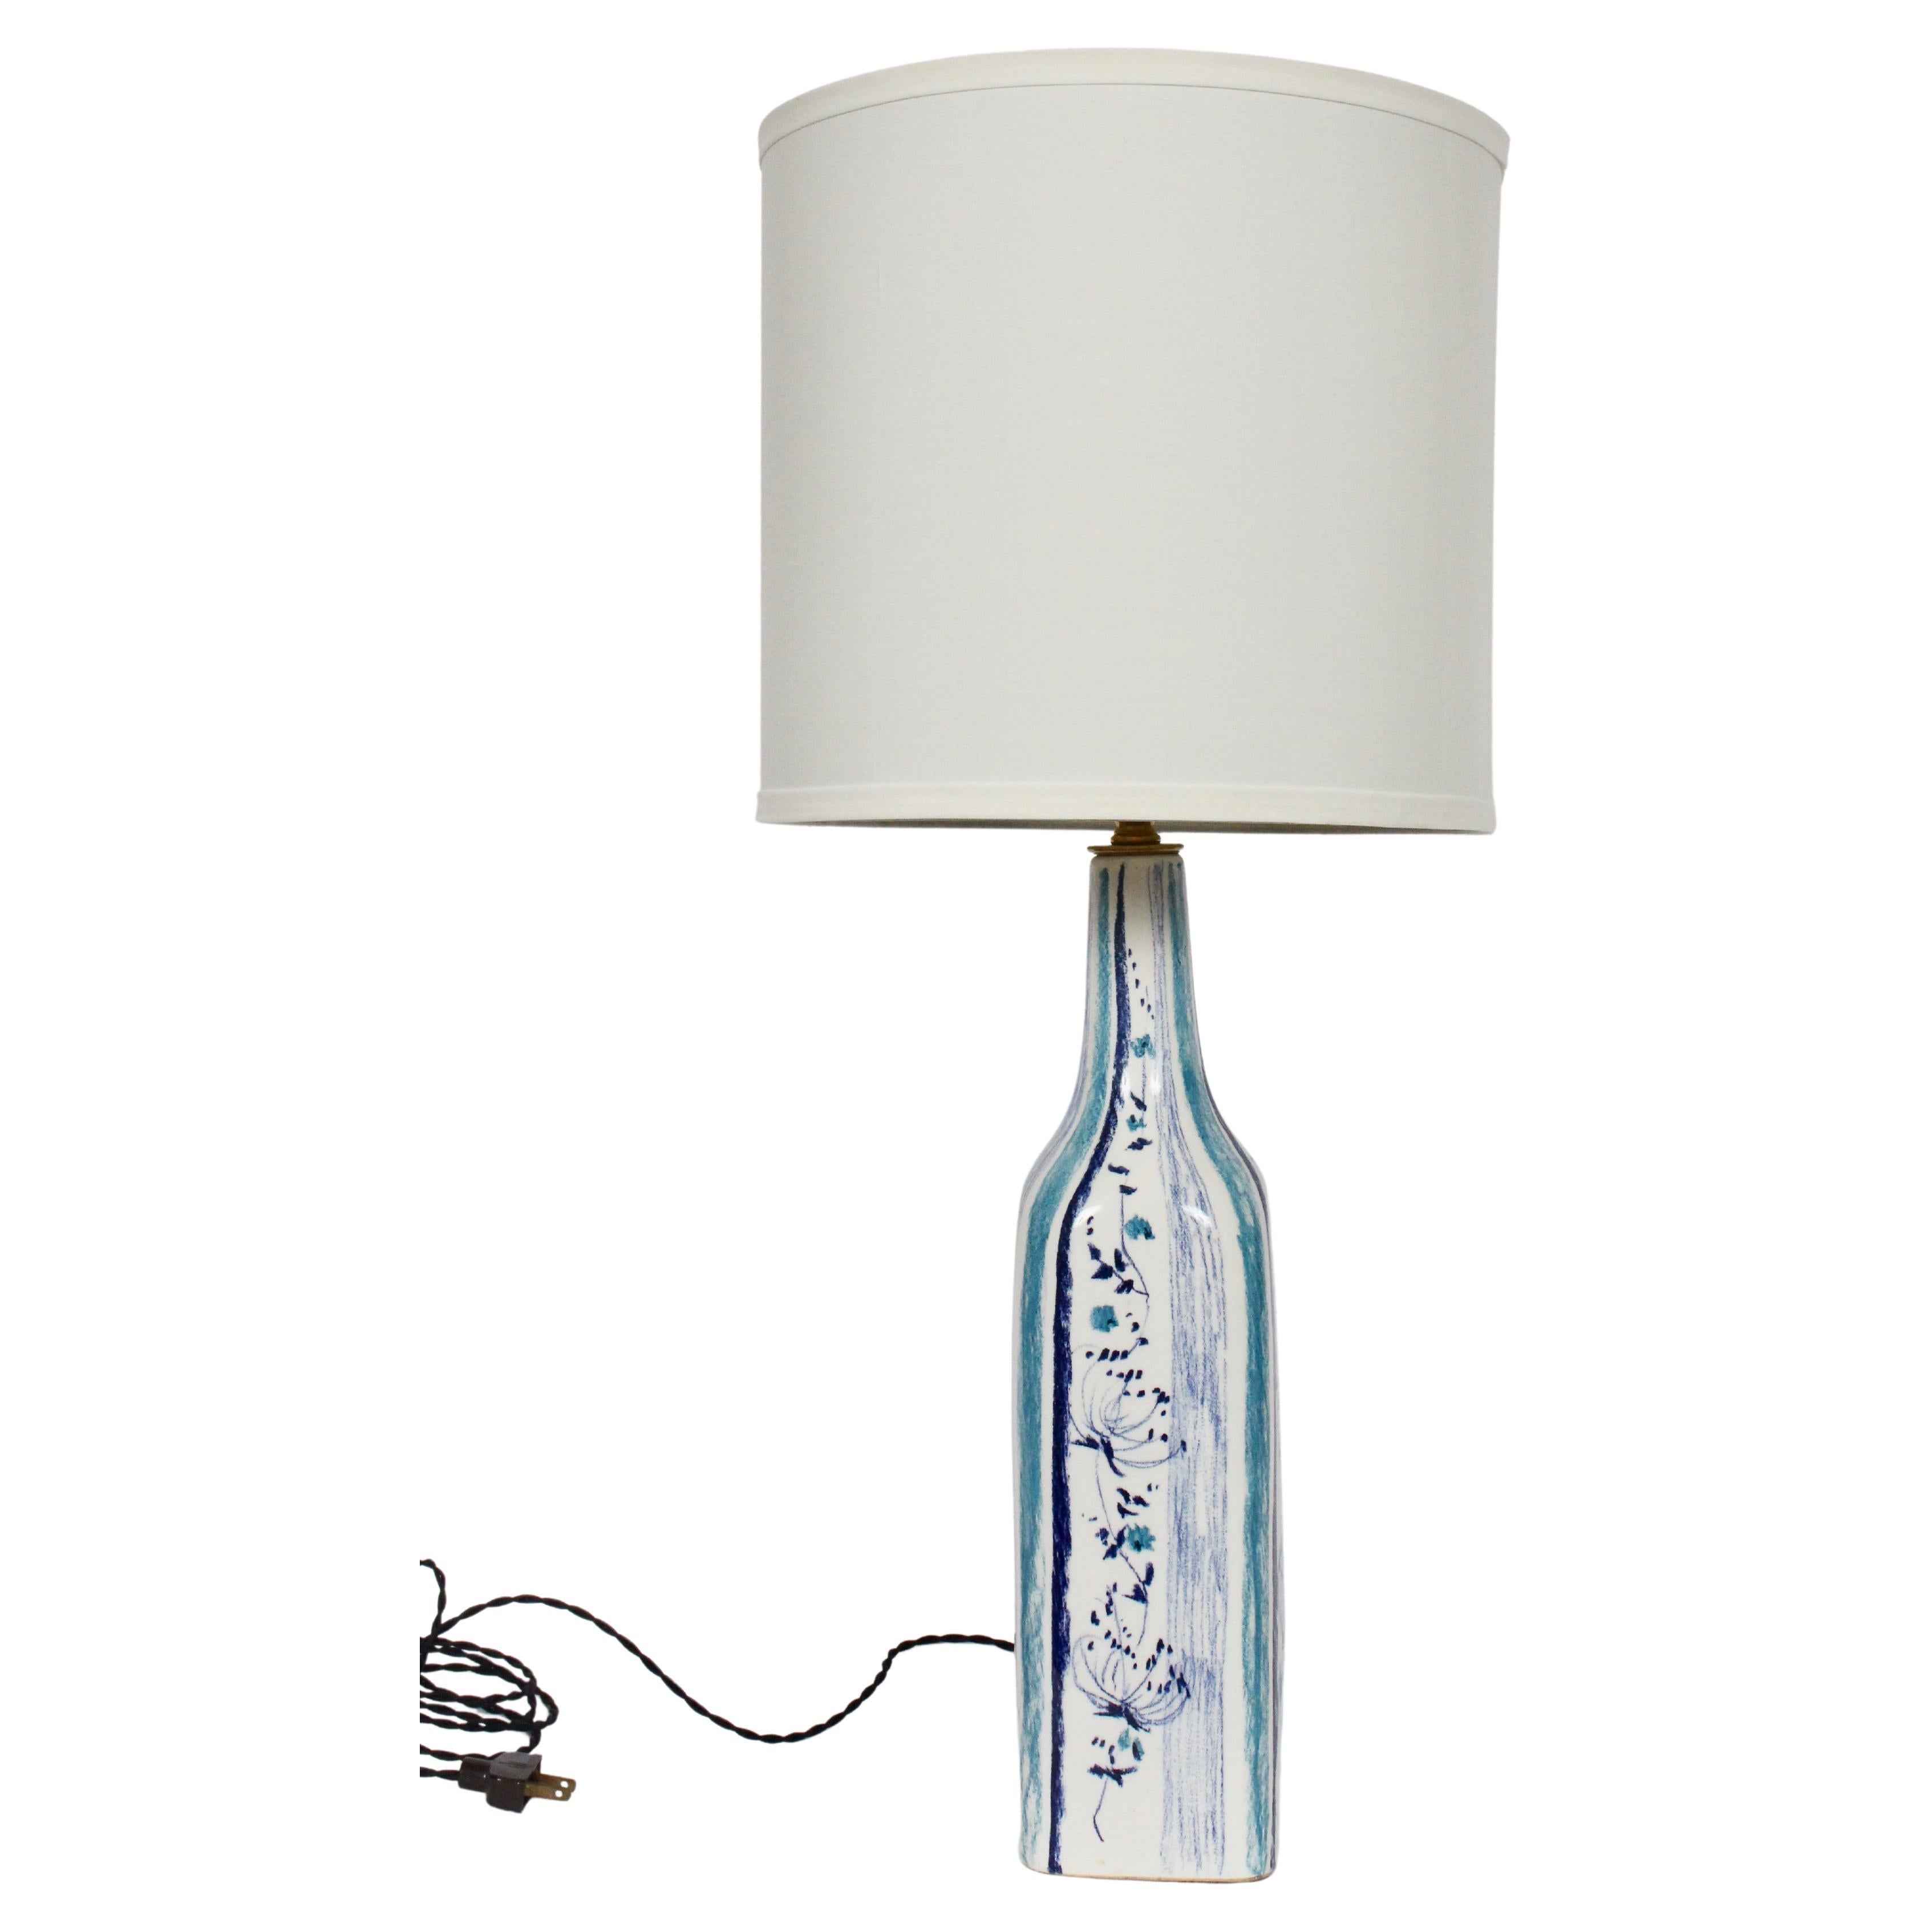 Viso Italy Hand Painted Blue Floral Art Pottery Table Lamp, 1960's For Sale